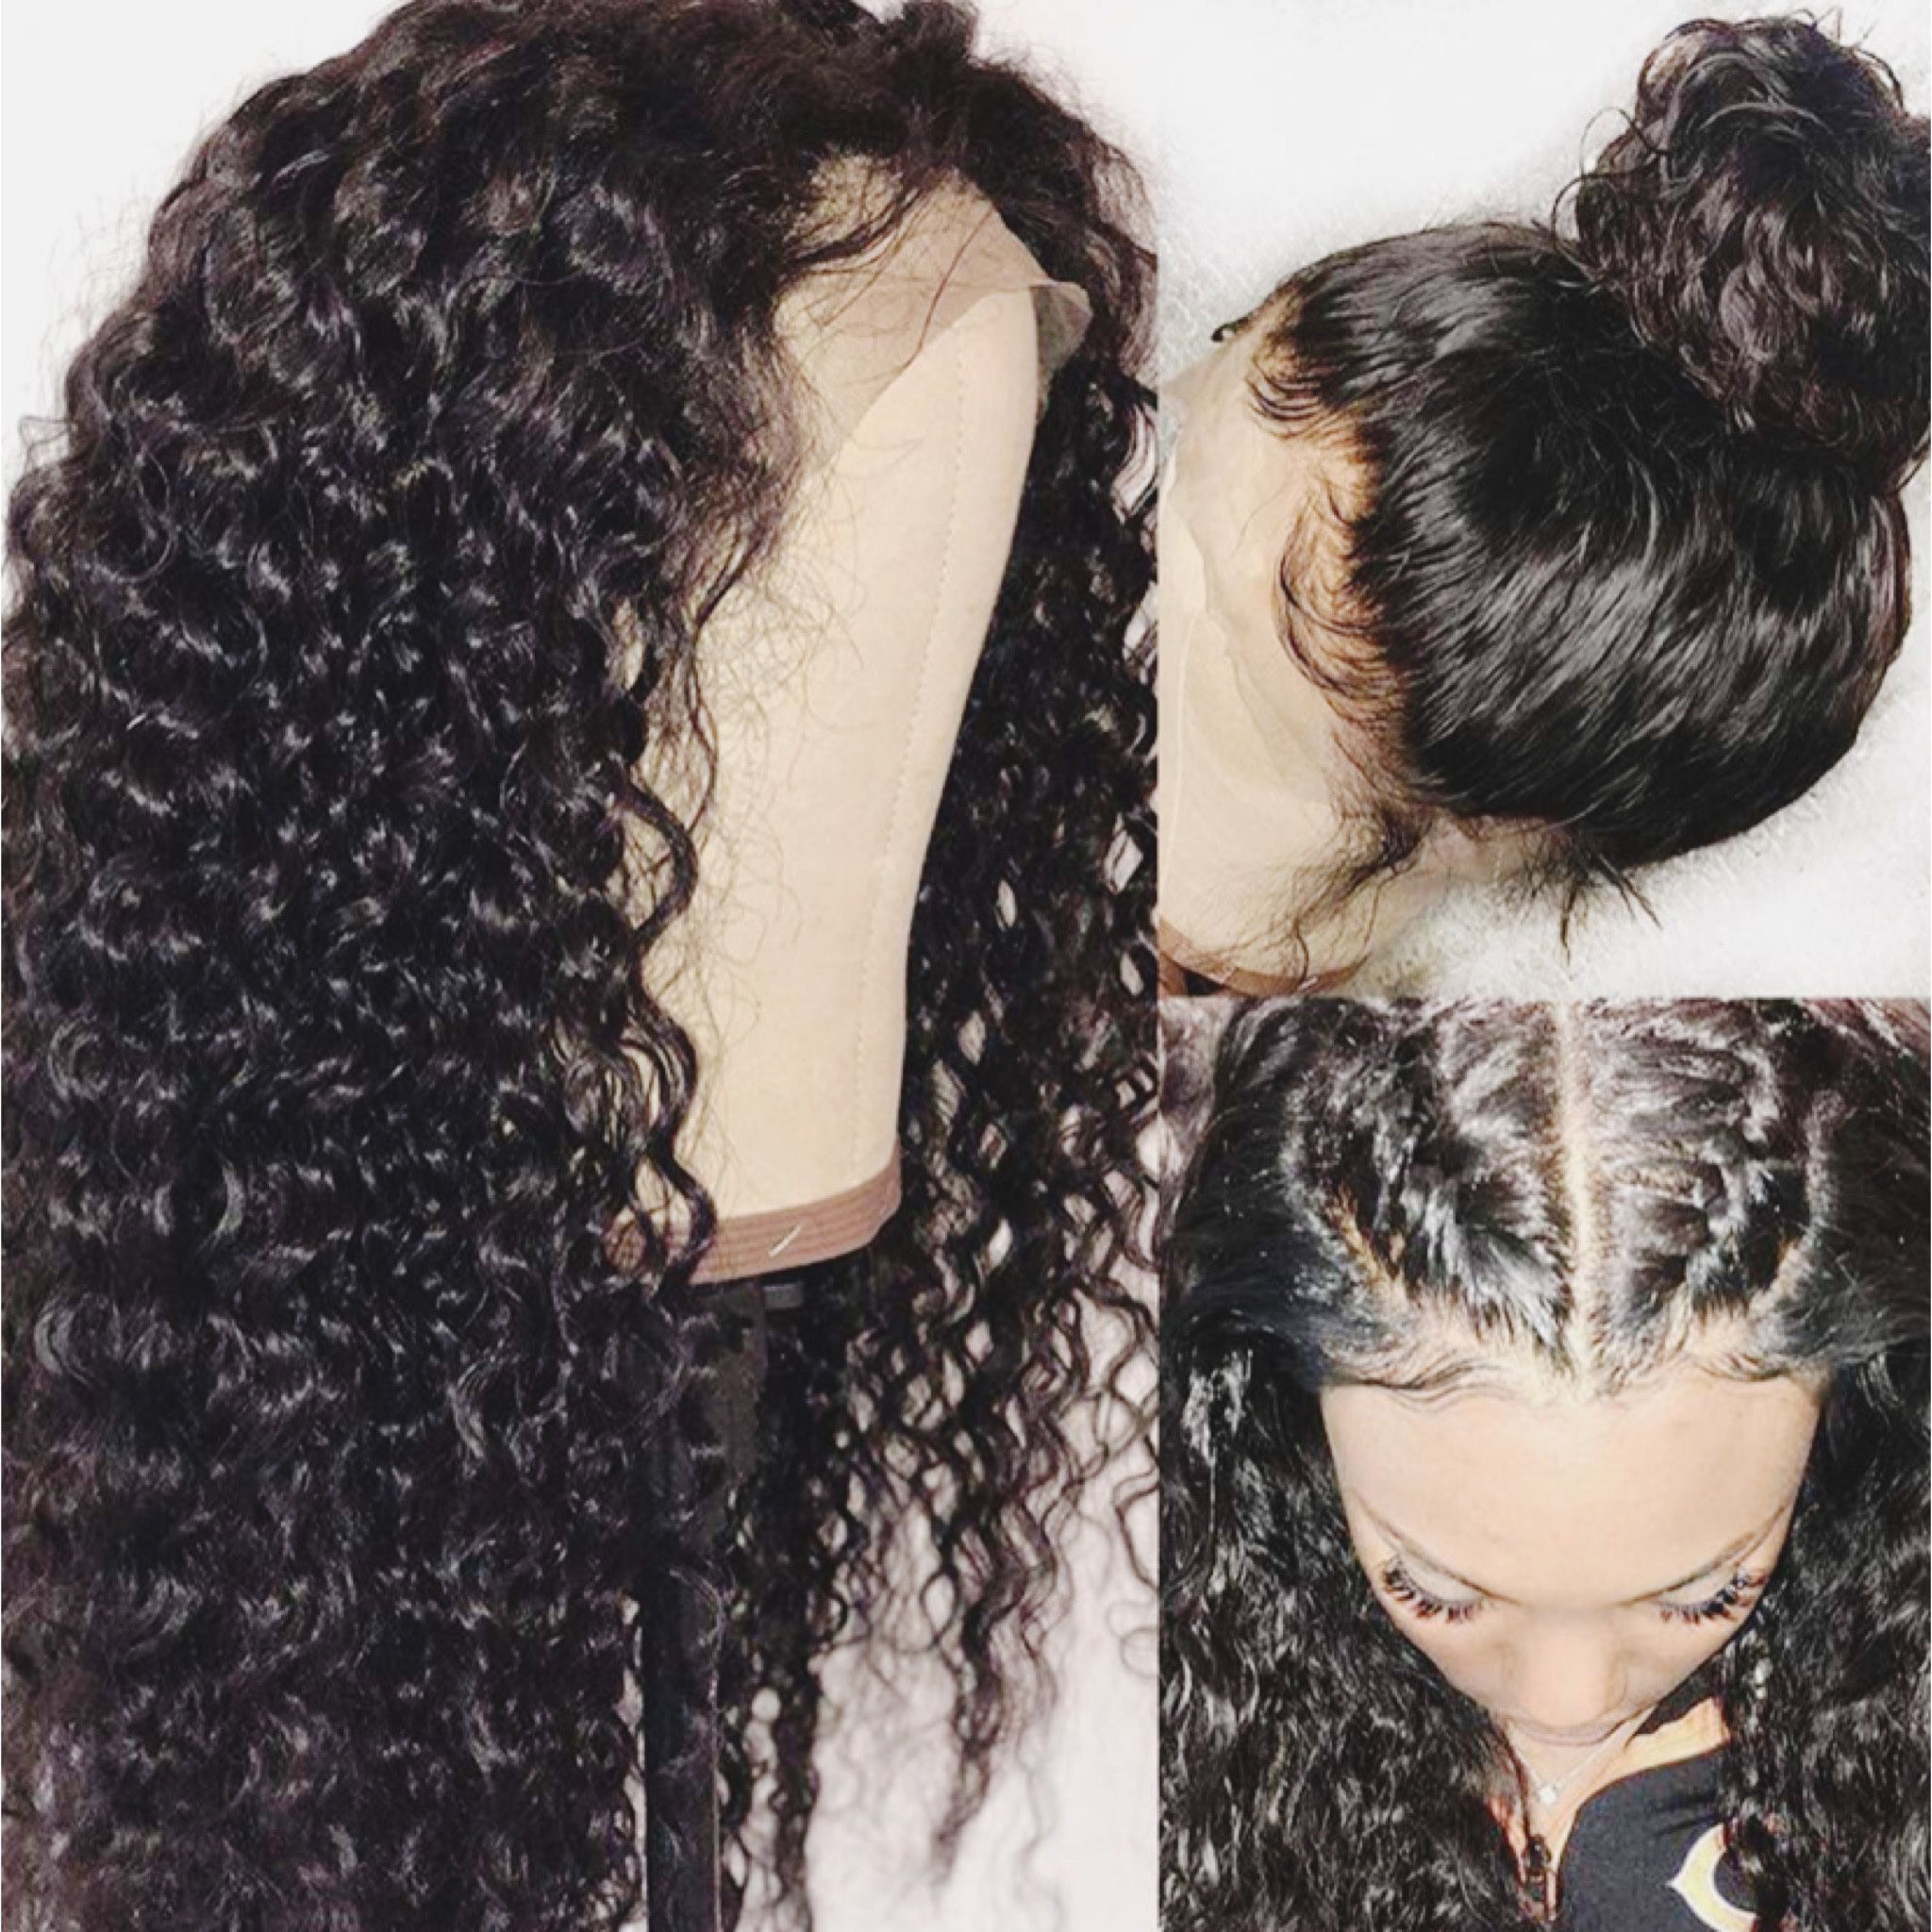 26” Curl Frontal Lace Wig